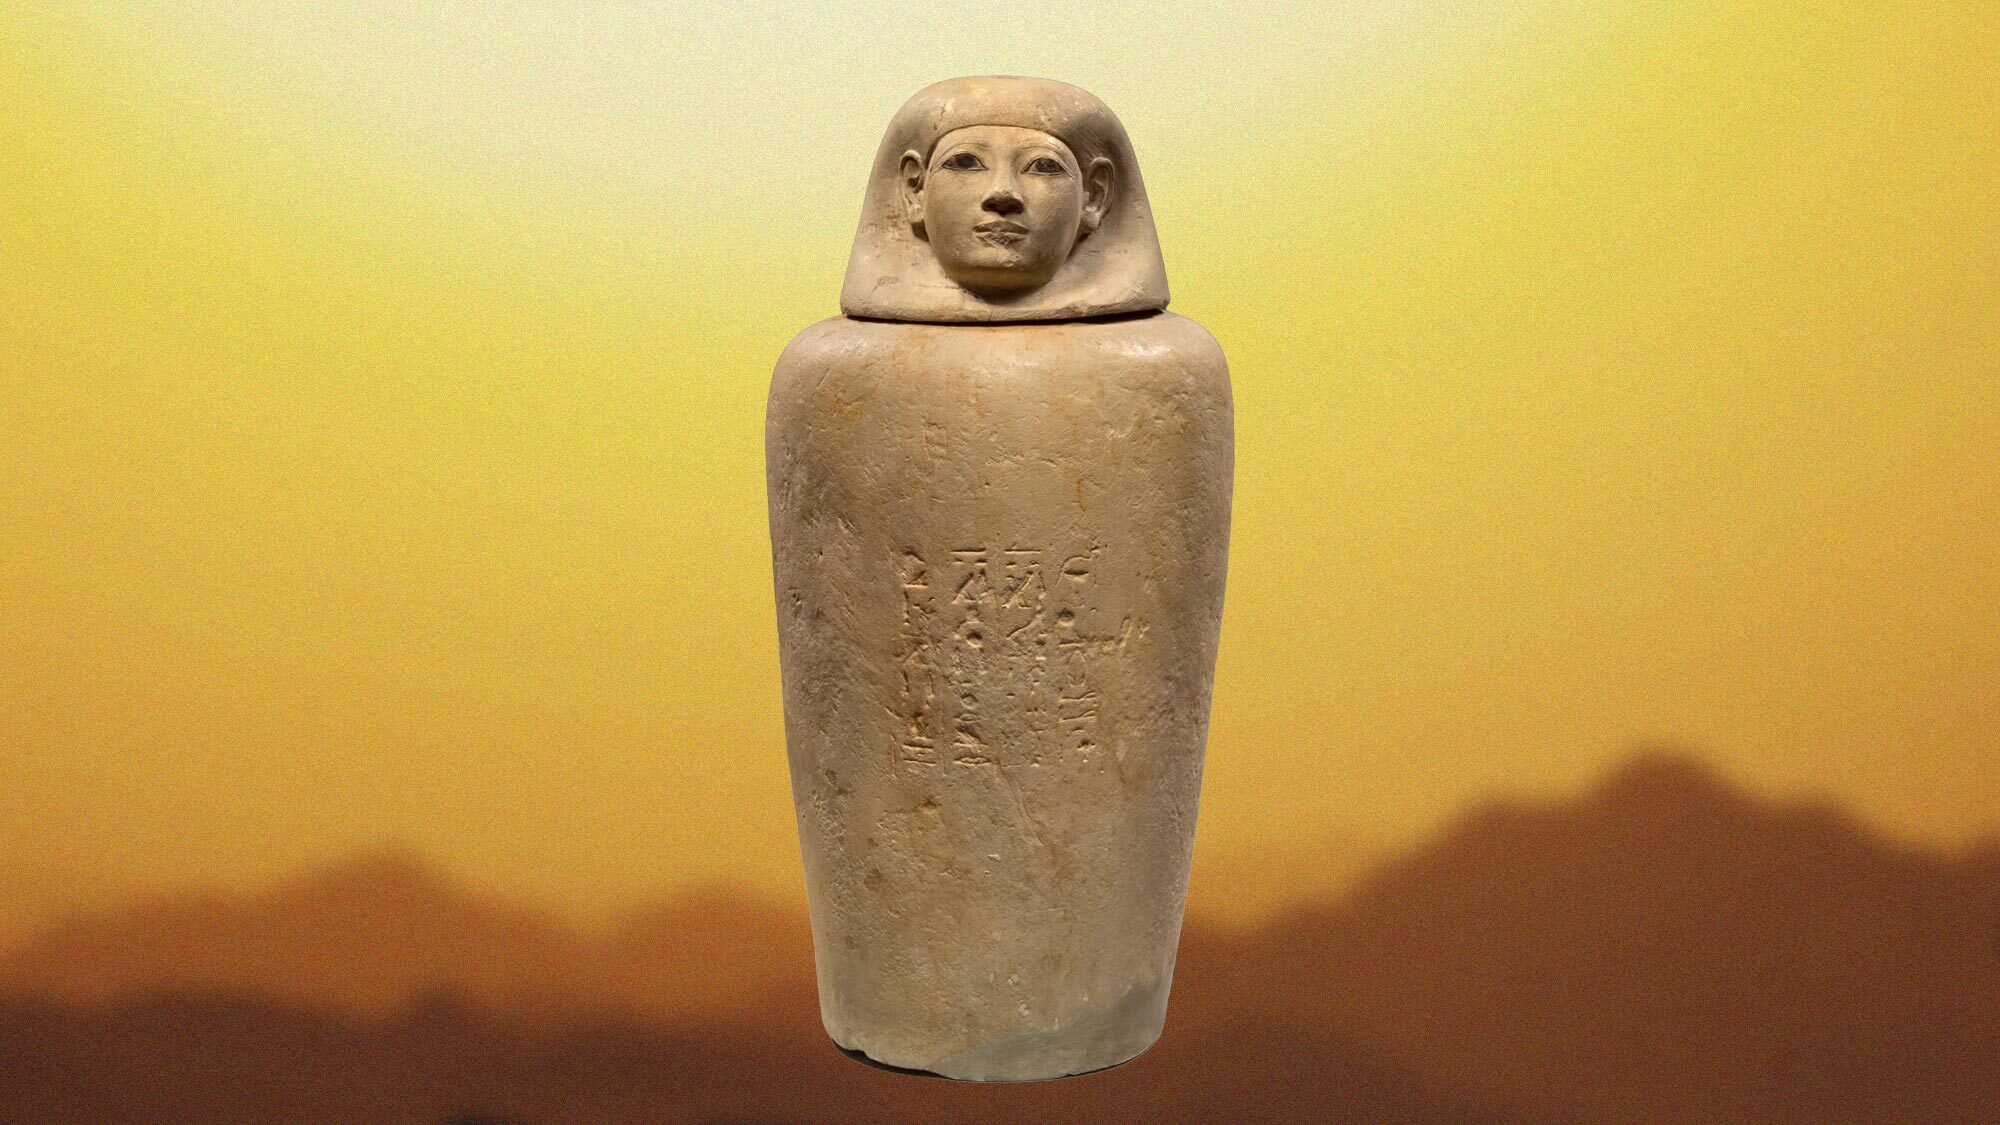 Ancient Egyptian mummy balm probably smelled delicious